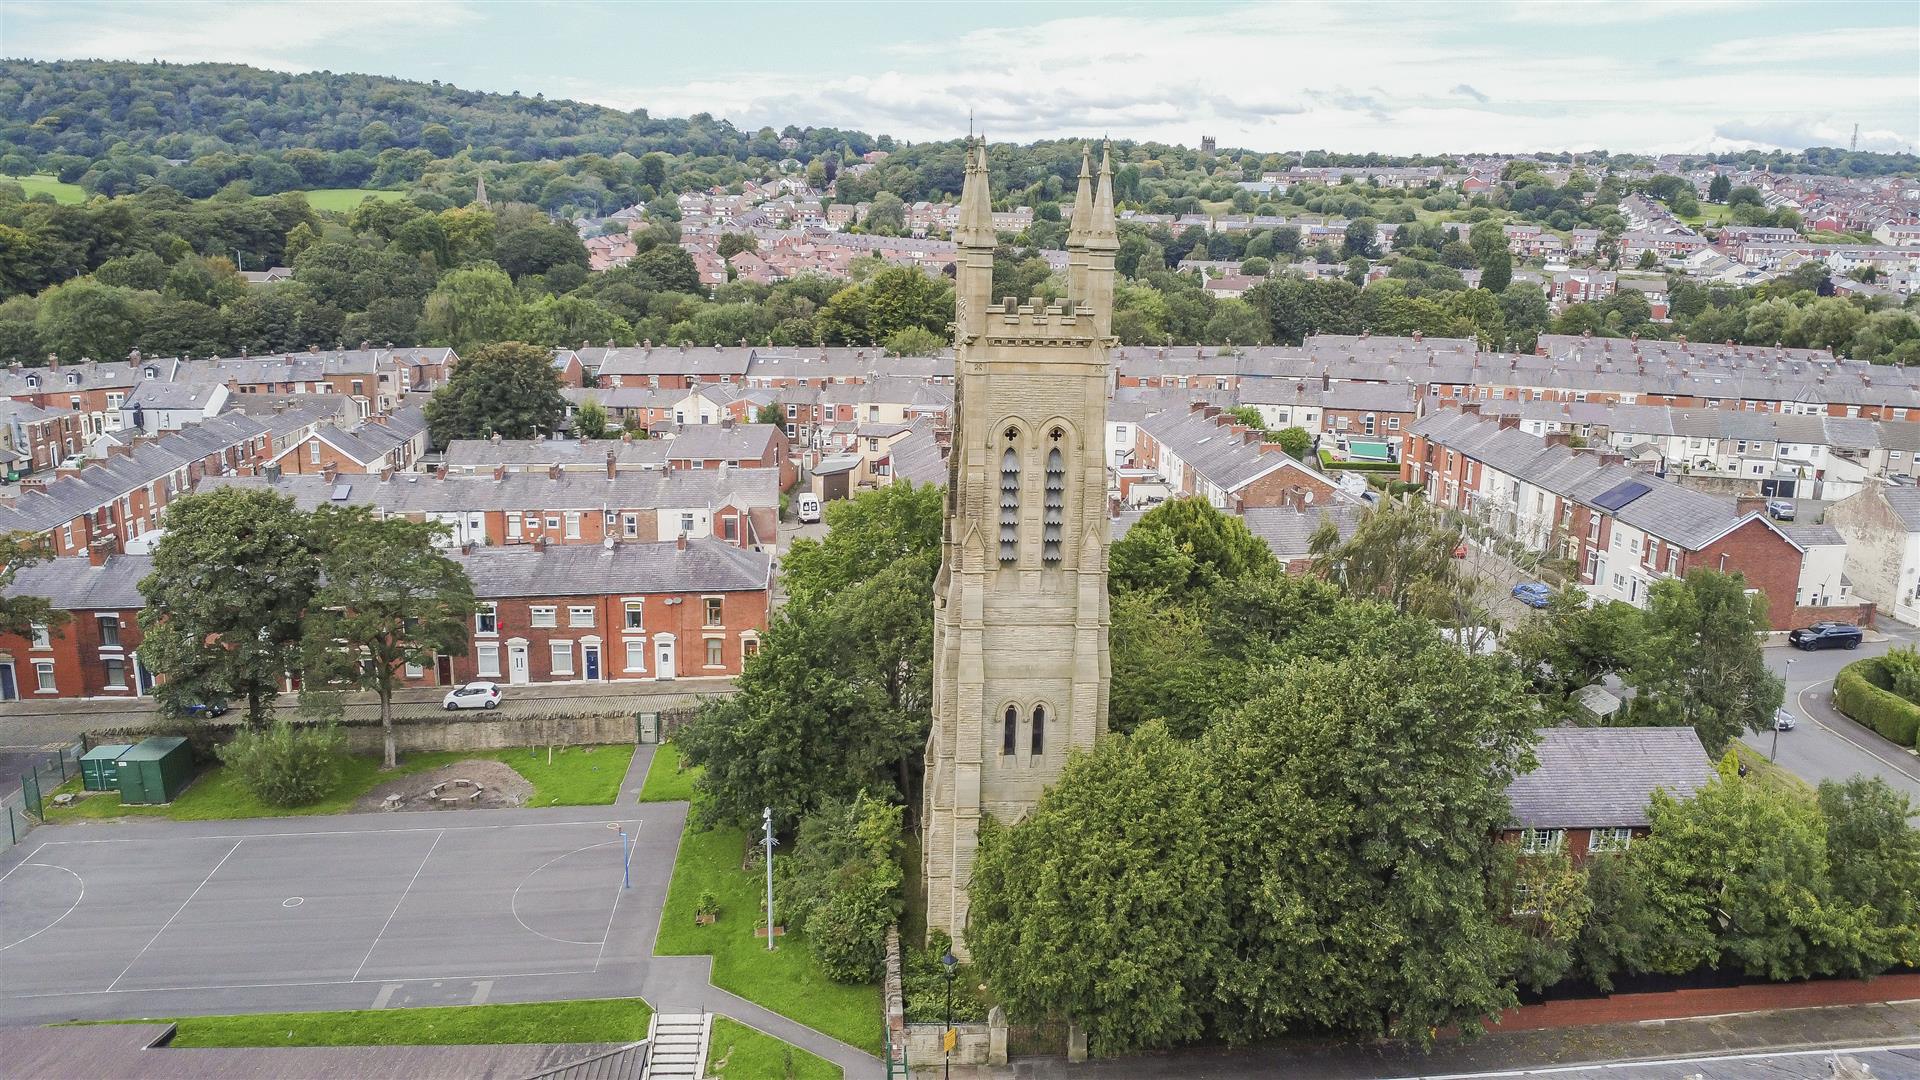 St Philips Church Tower Image